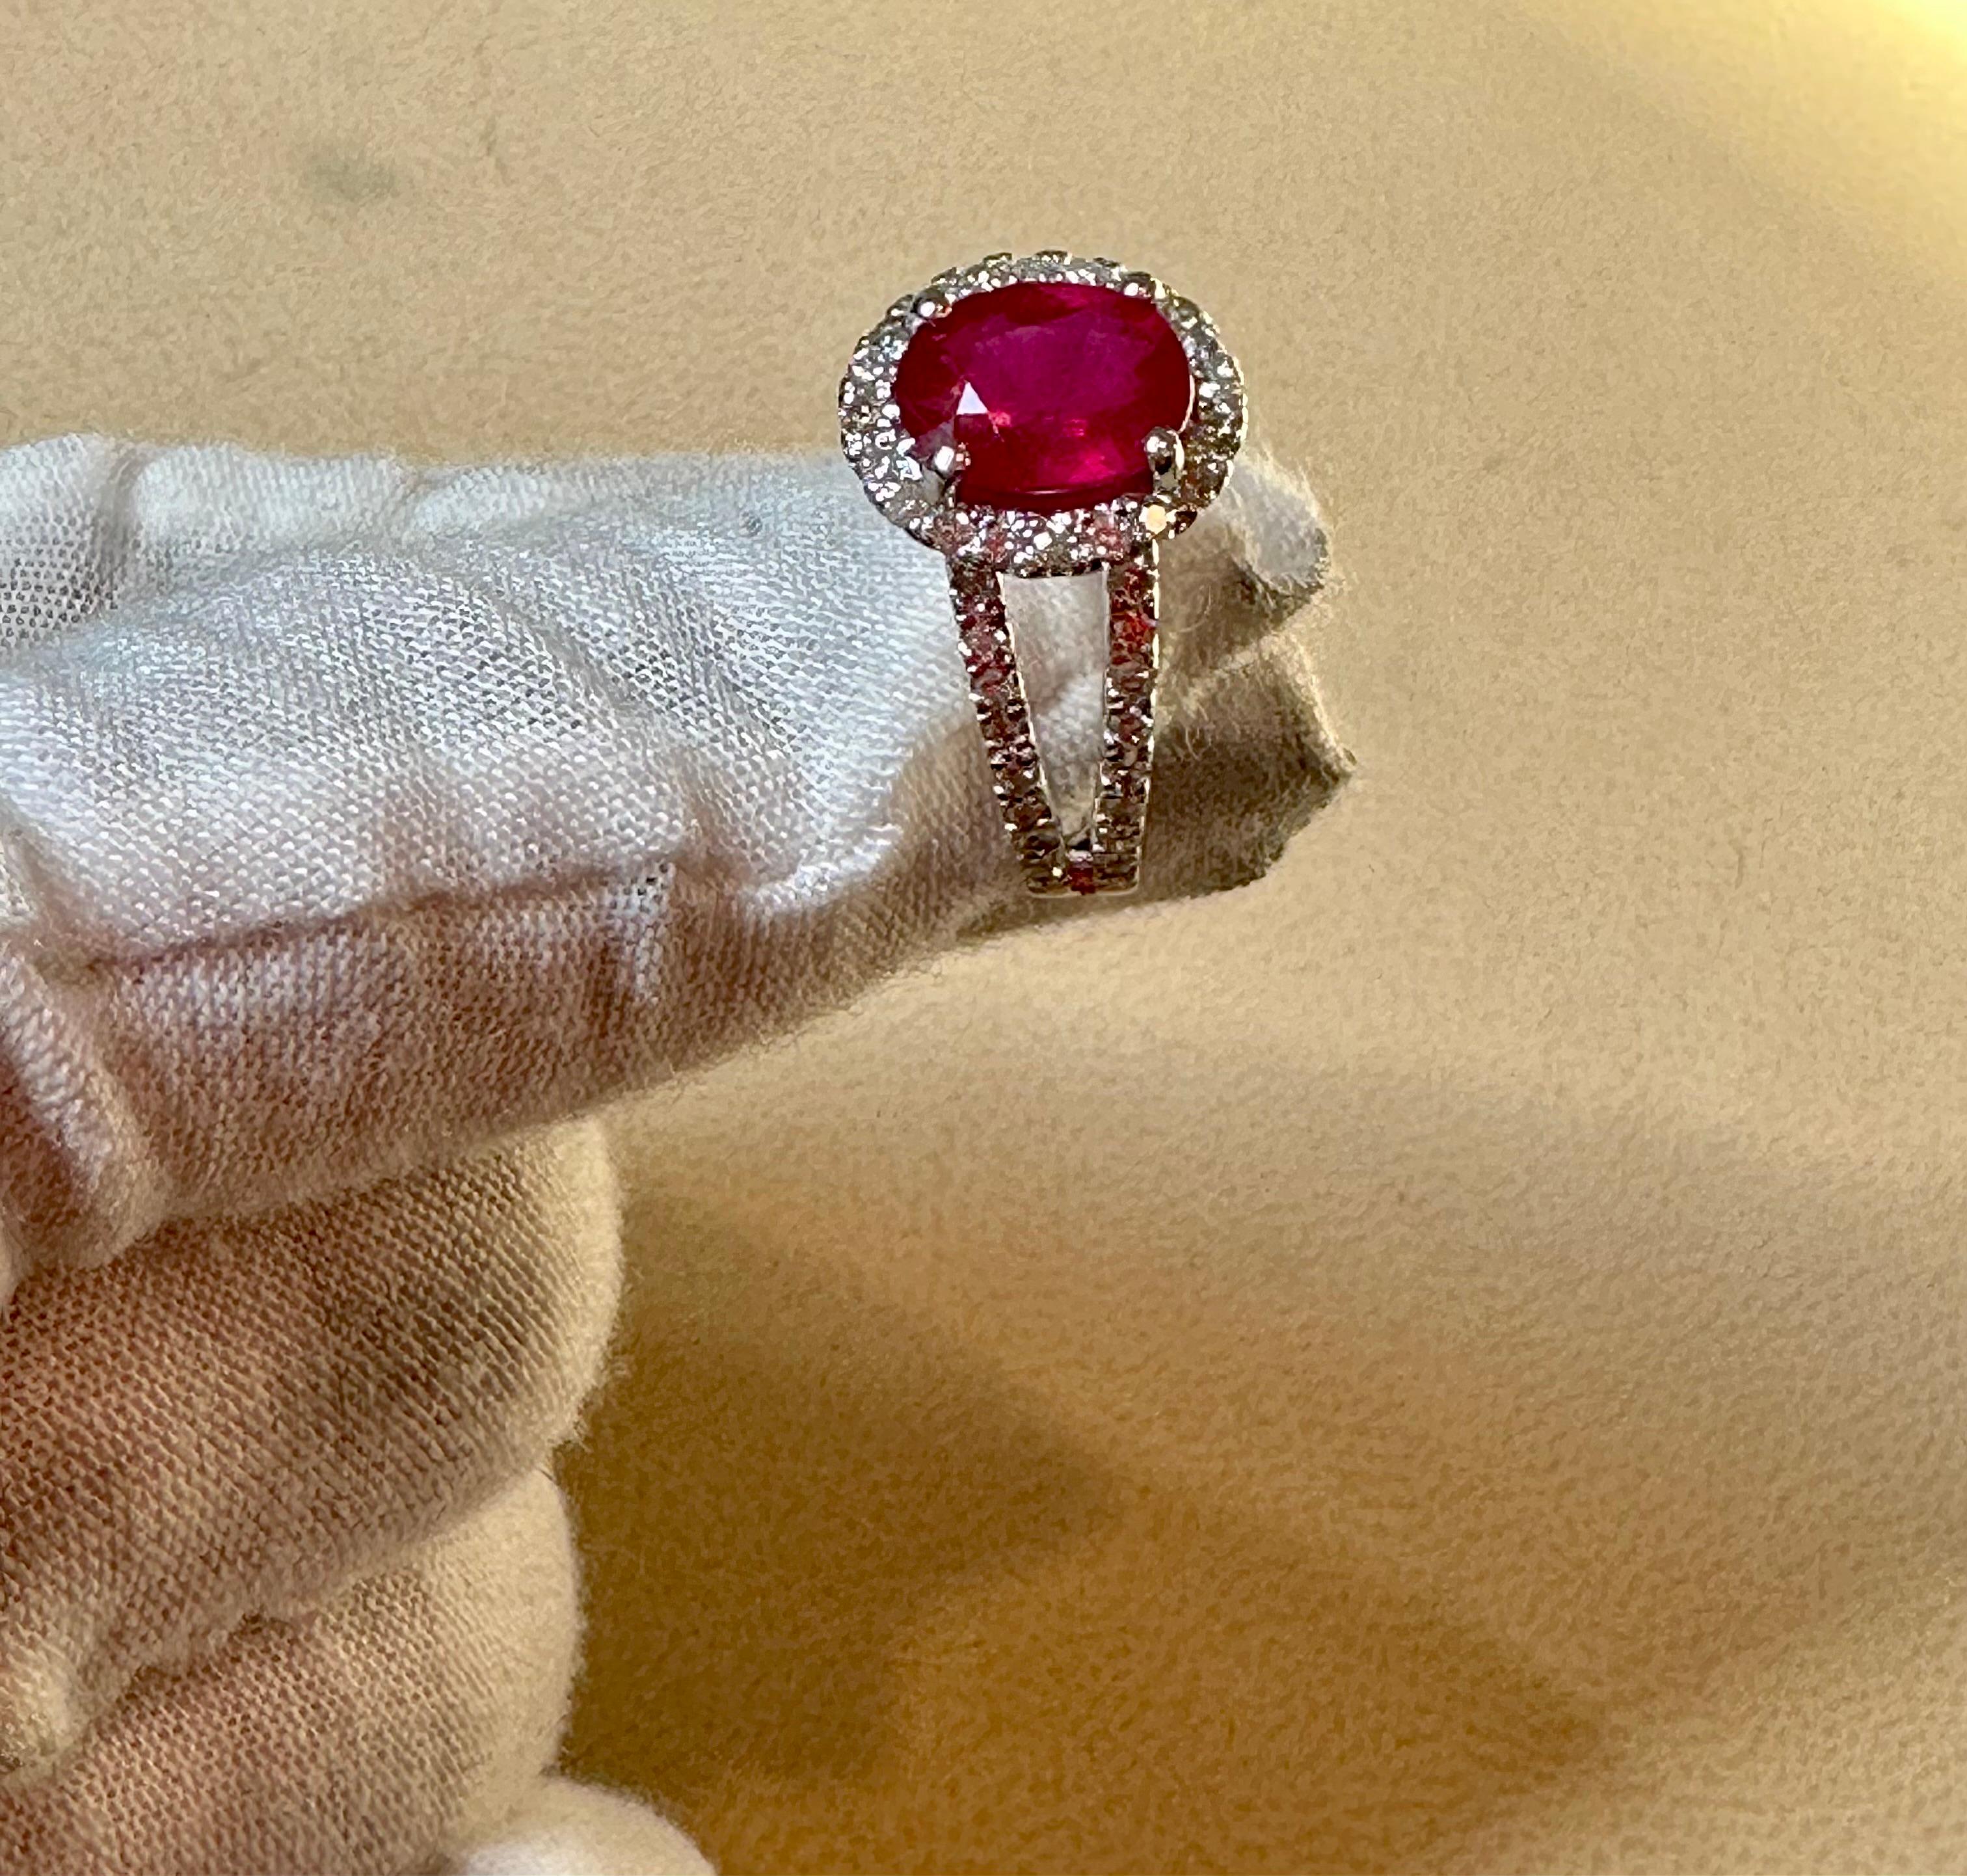 2.5 Carat Oval Treated Ruby & 2 ct Diamond Ring 14 Karat White Gold Size 7.25 For Sale 2